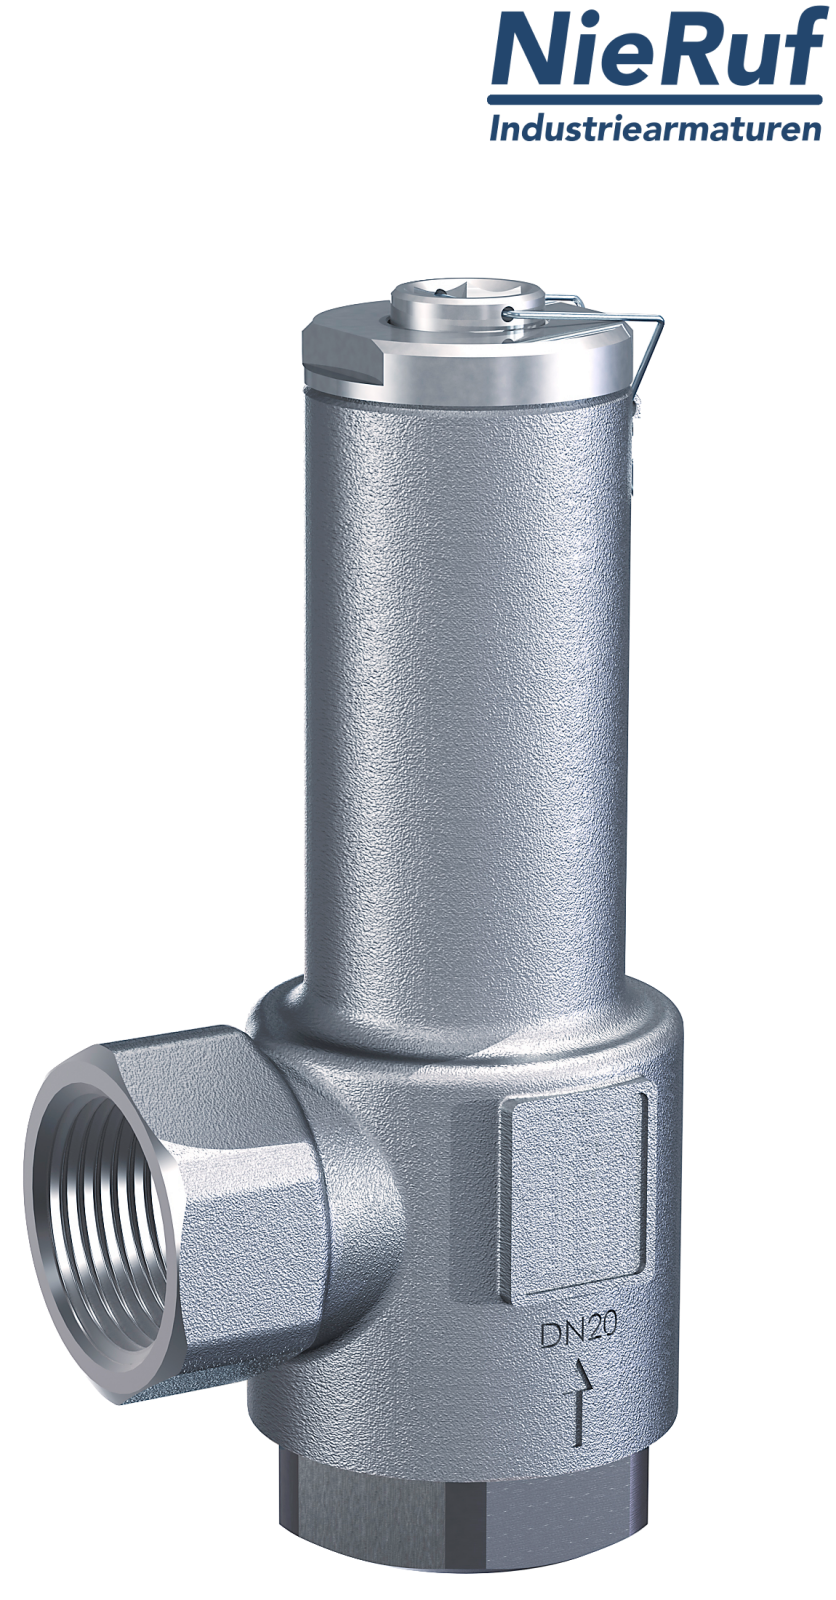 angle-type overflow valve 2" inch fm UV03 stainless steel AISI 316L 0,5 - 2,5 bar